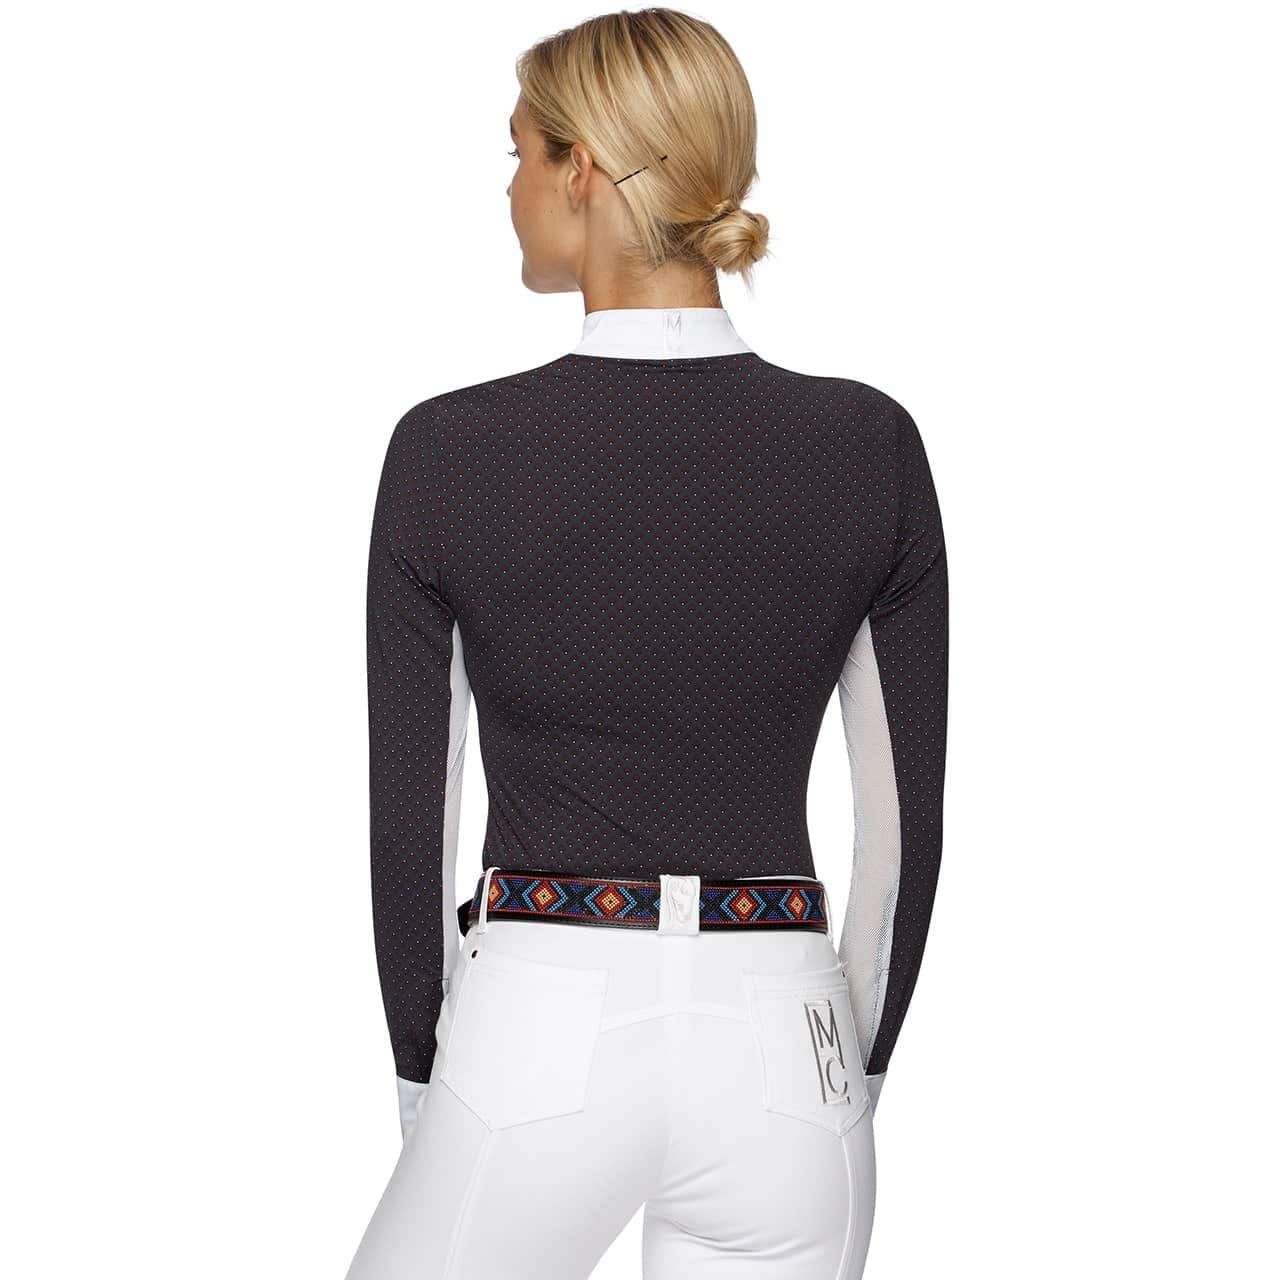 Emcee Cisco Long Sleeve Show Shirt-Southern Sport Horses-The Equestrian